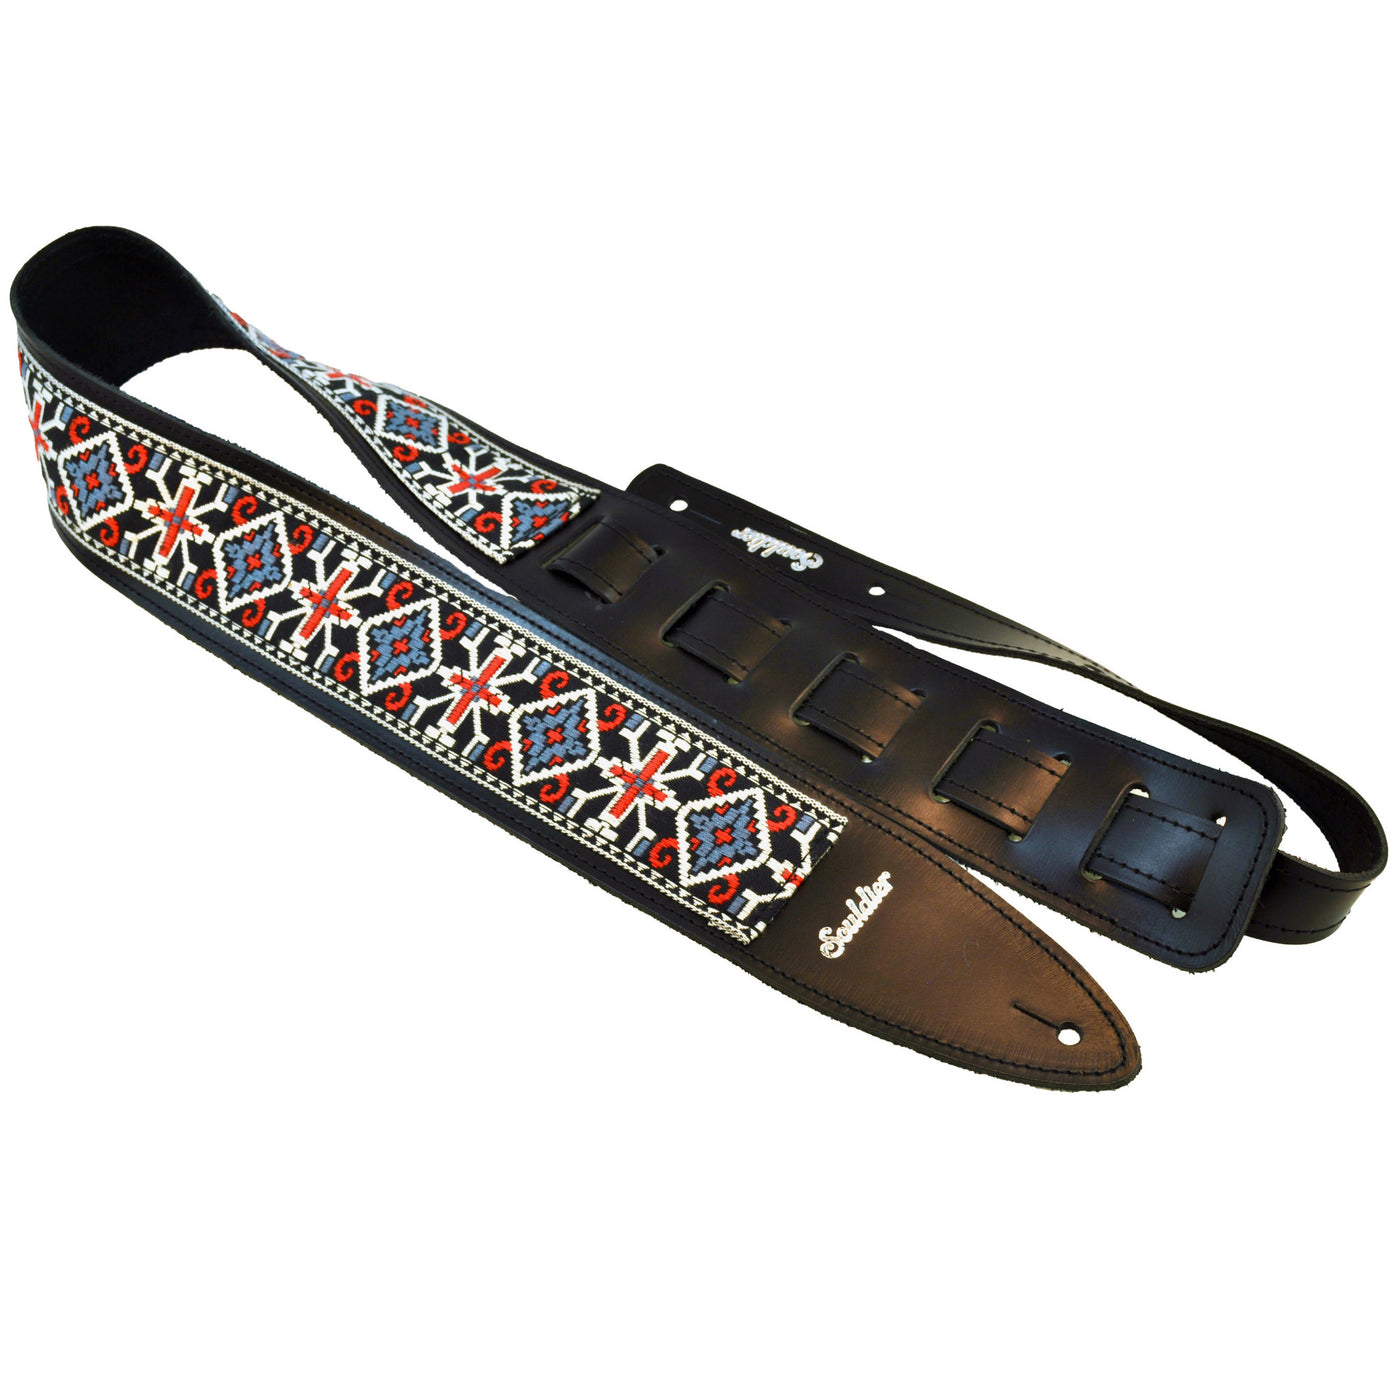 Souldier TGS1317BK02BK - Handmade Souldier Fabric Torpedo Strap for Bass, Electric, or Acoustic Guitar, Adjustable Length from 42.5" to 55" Made in the USA, Blue